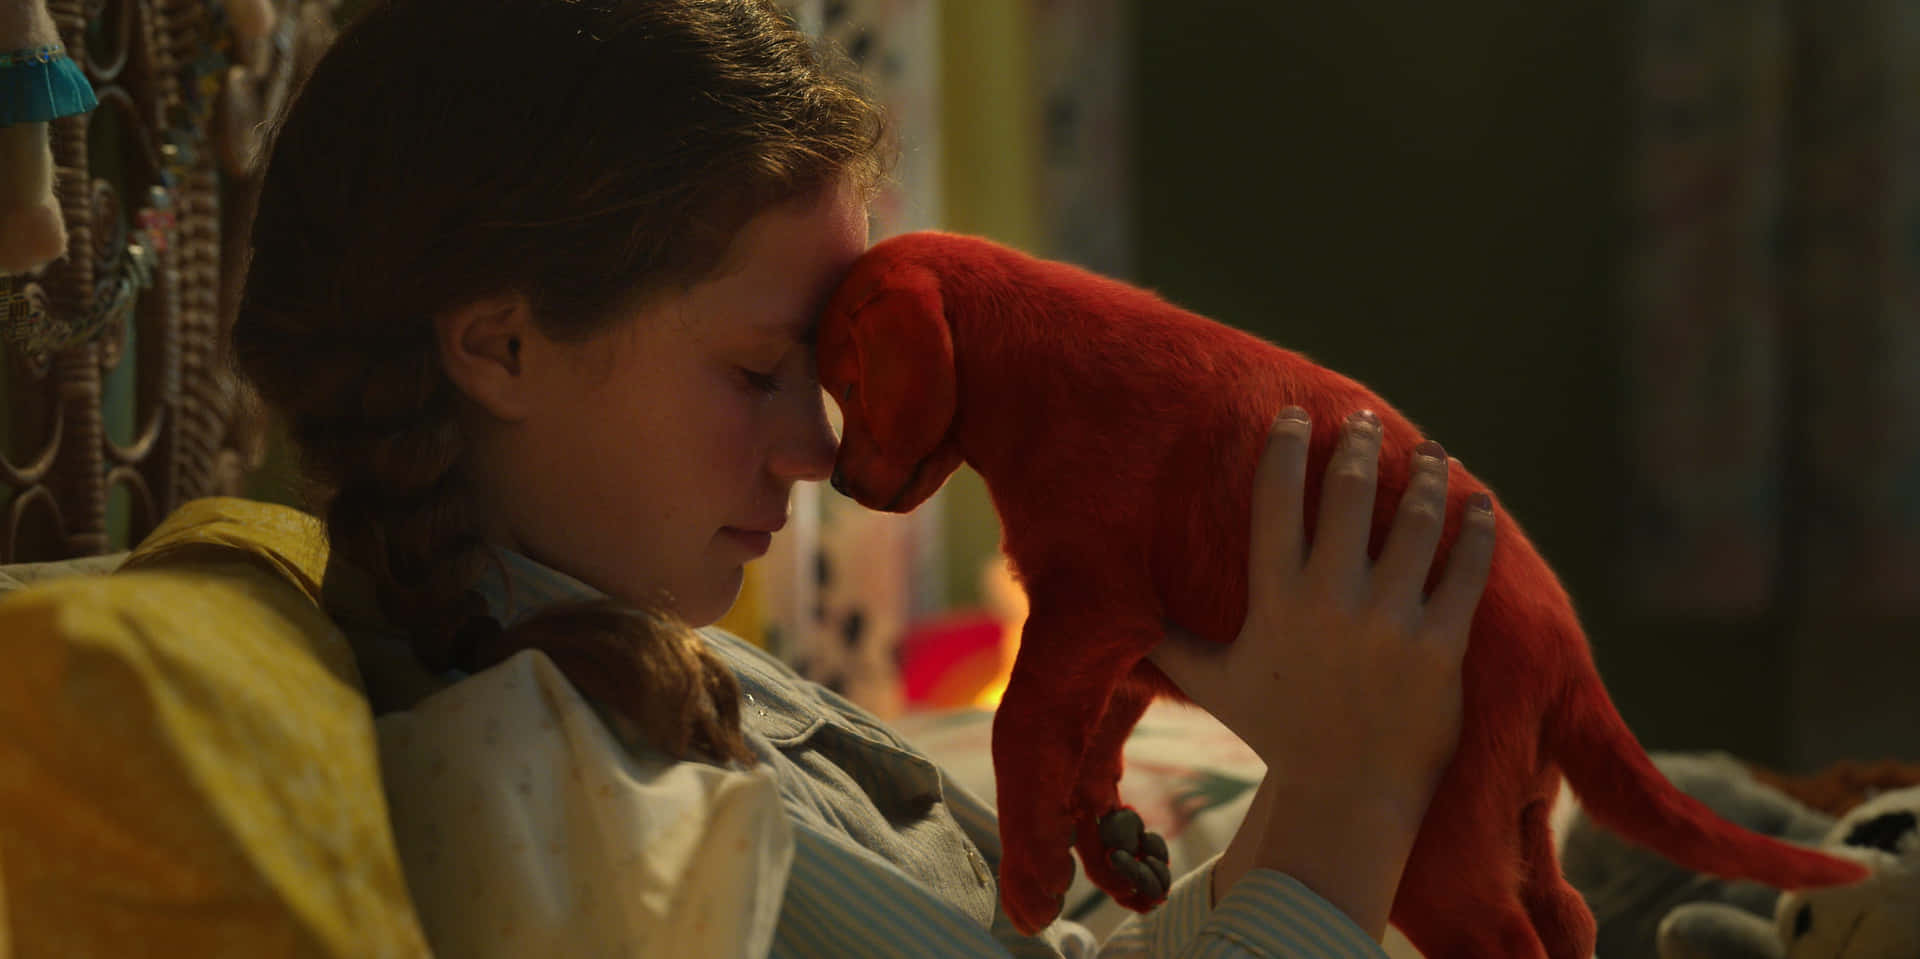 A Girl Is Hugging A Red Dog In Bed